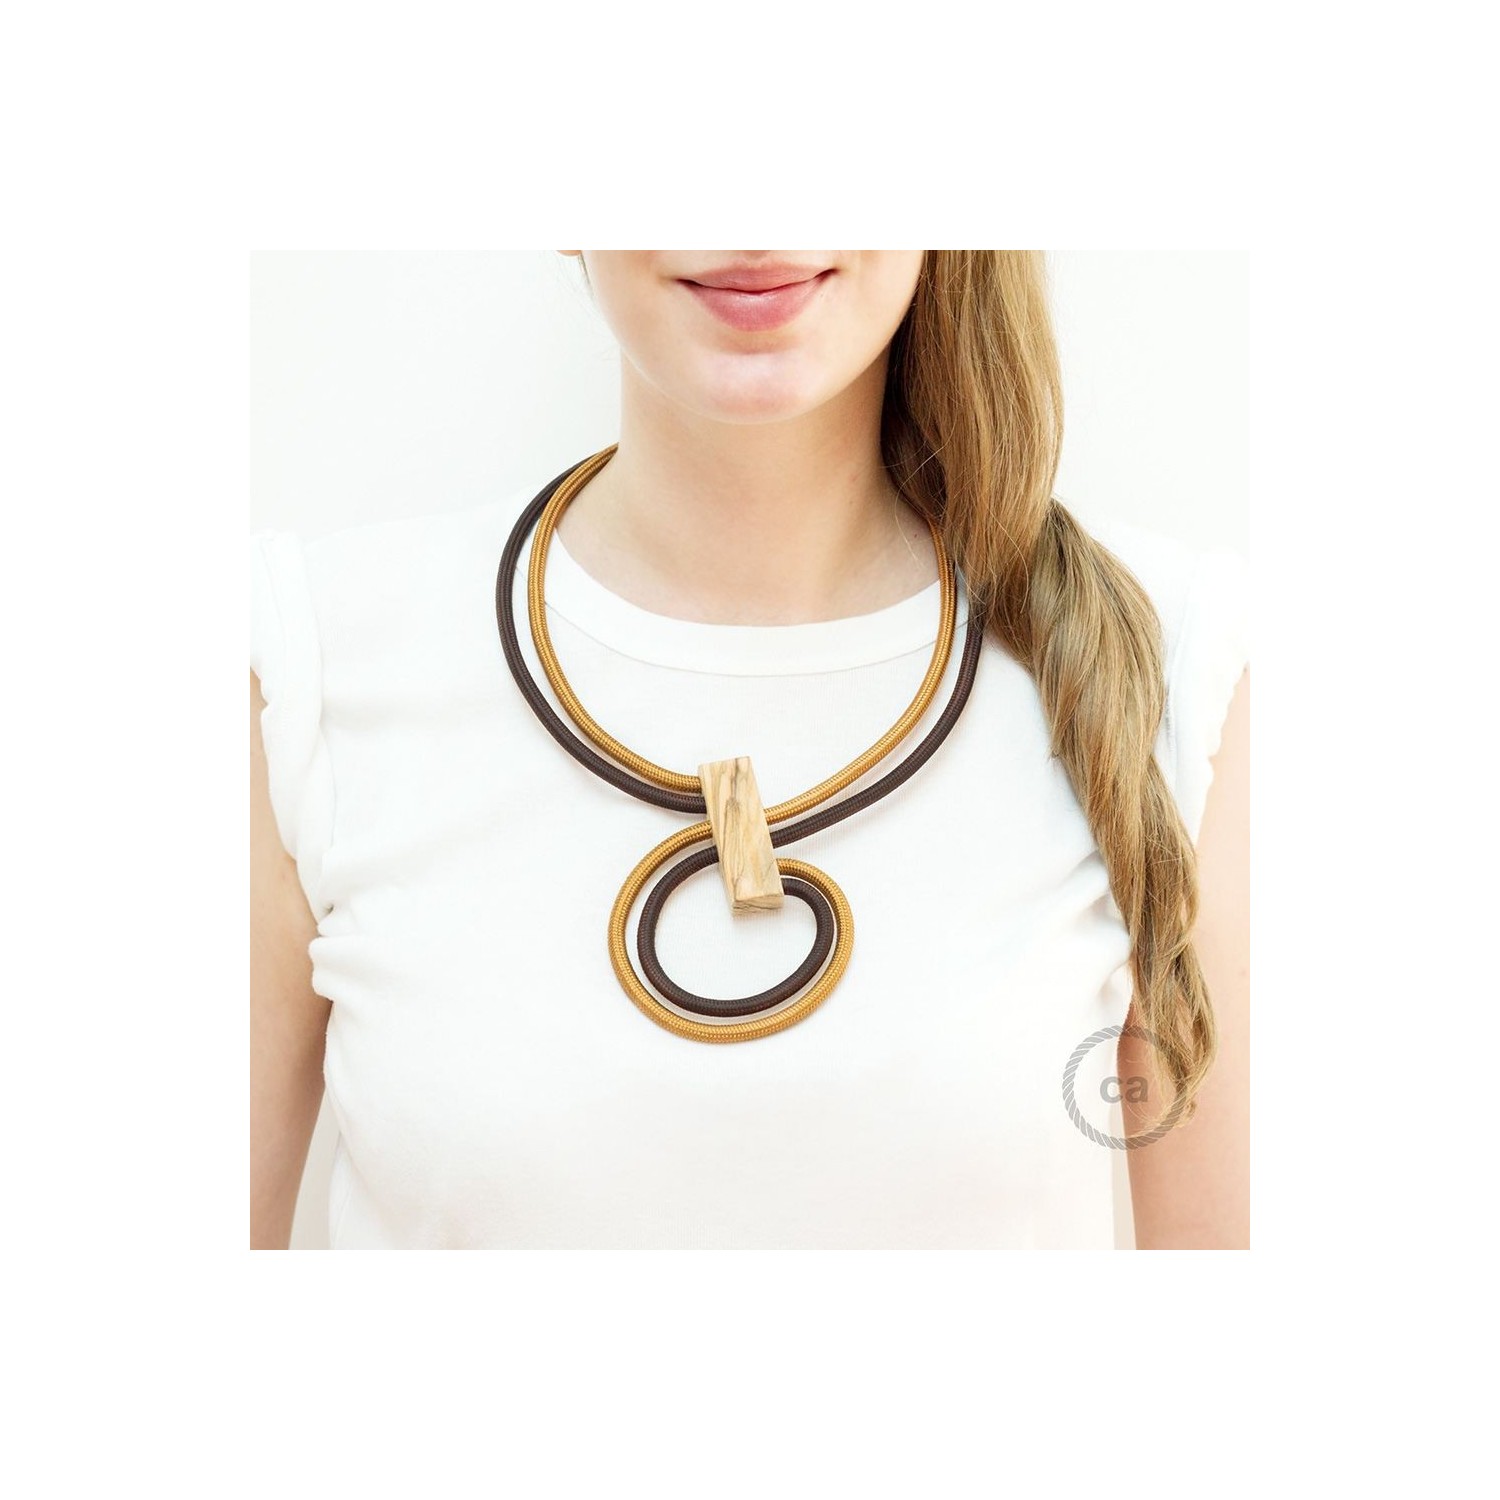 Infinity necklace adjustable bicolor Whiskey RM22 and Brown RM13.